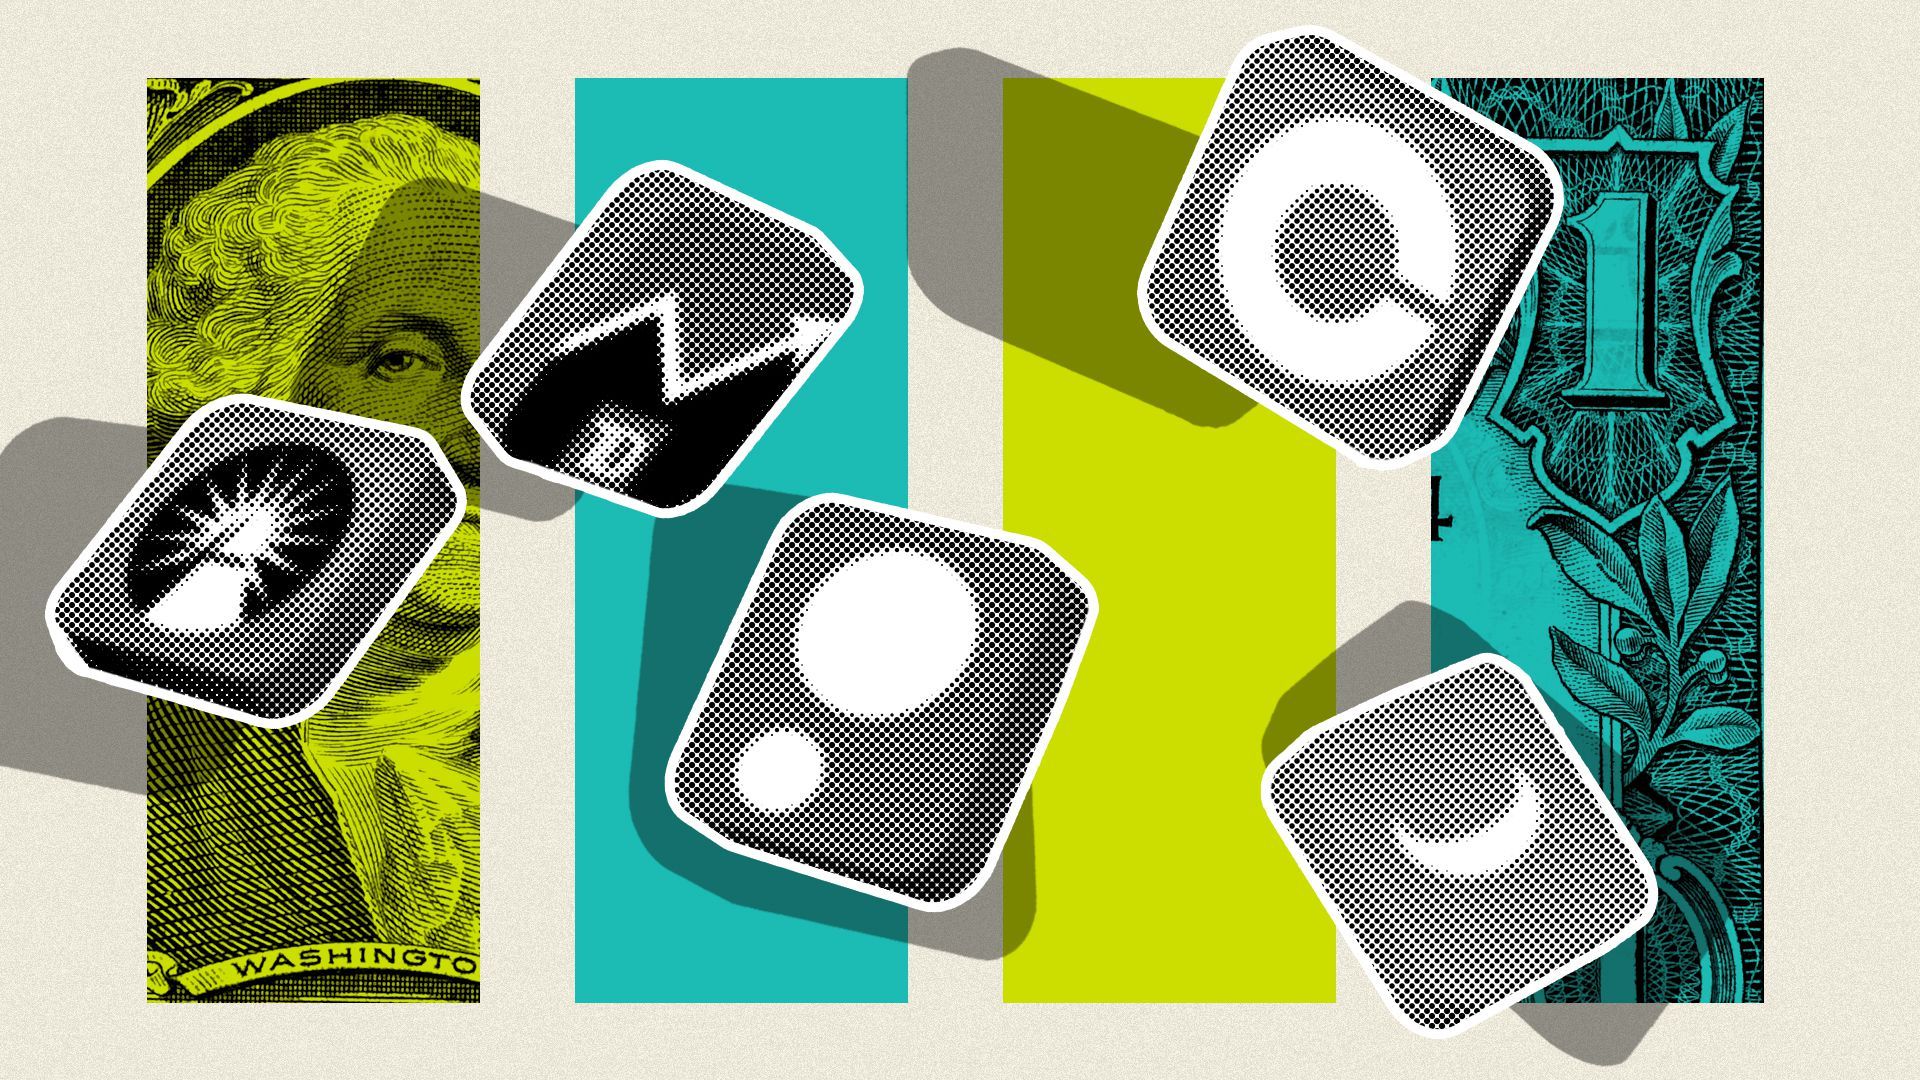 Illustration of smartphone app icons floating over green rectangles, with details of one dollar bills in two of them.